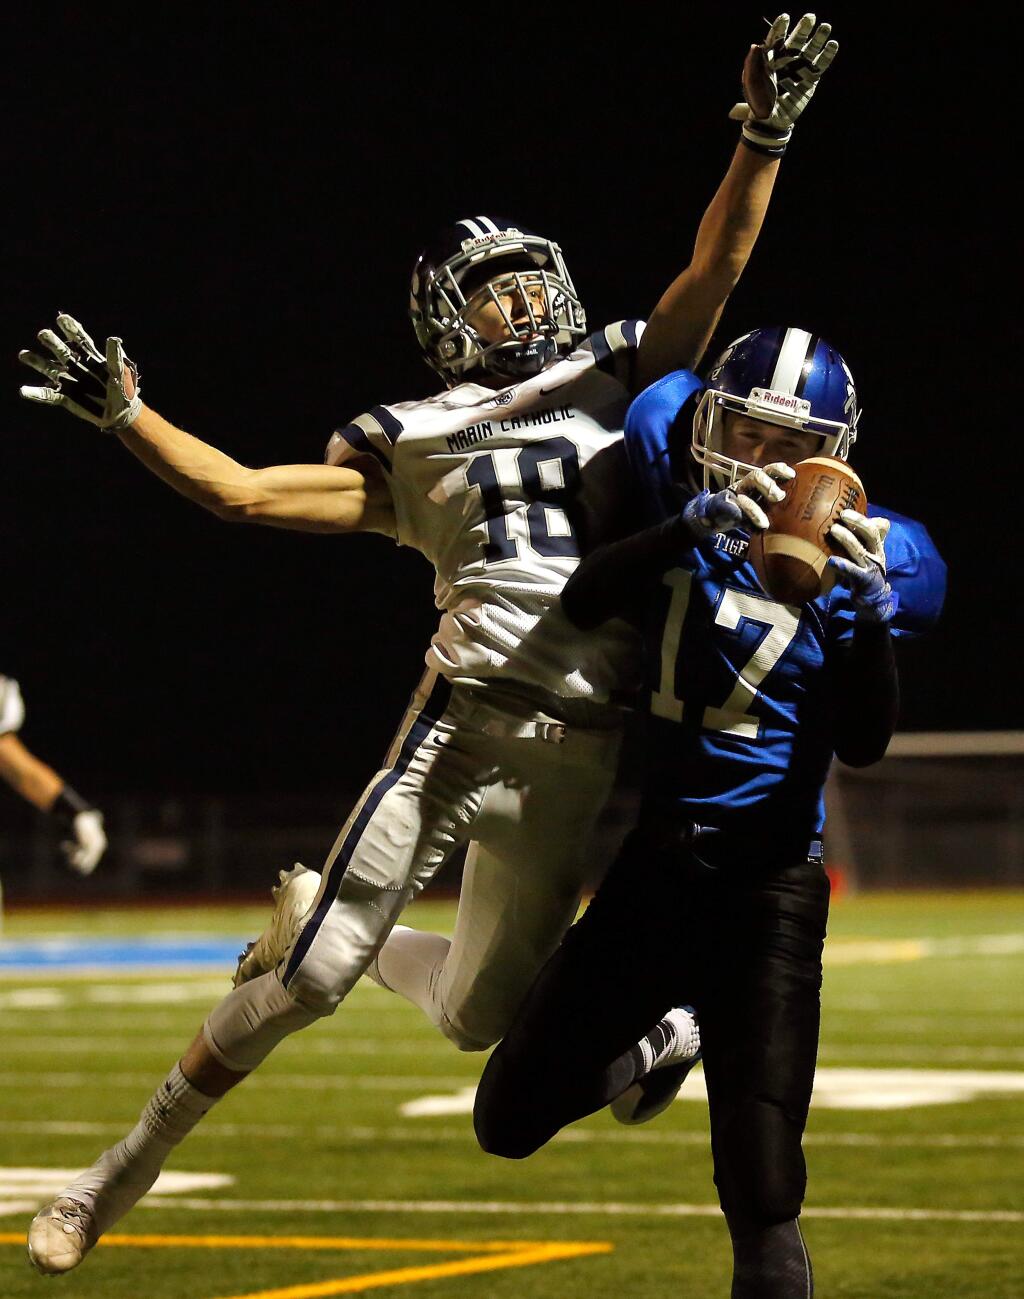 Analy's Ross Simmons (17), right, pulls in a touchdown catch in front of Marin Catholic's Liam Oprendek (18) during the first half of the NCS Division 3 playoff game on Friday, Nov. 25, 2016. (Alvin Jornada / The Press Democrat)